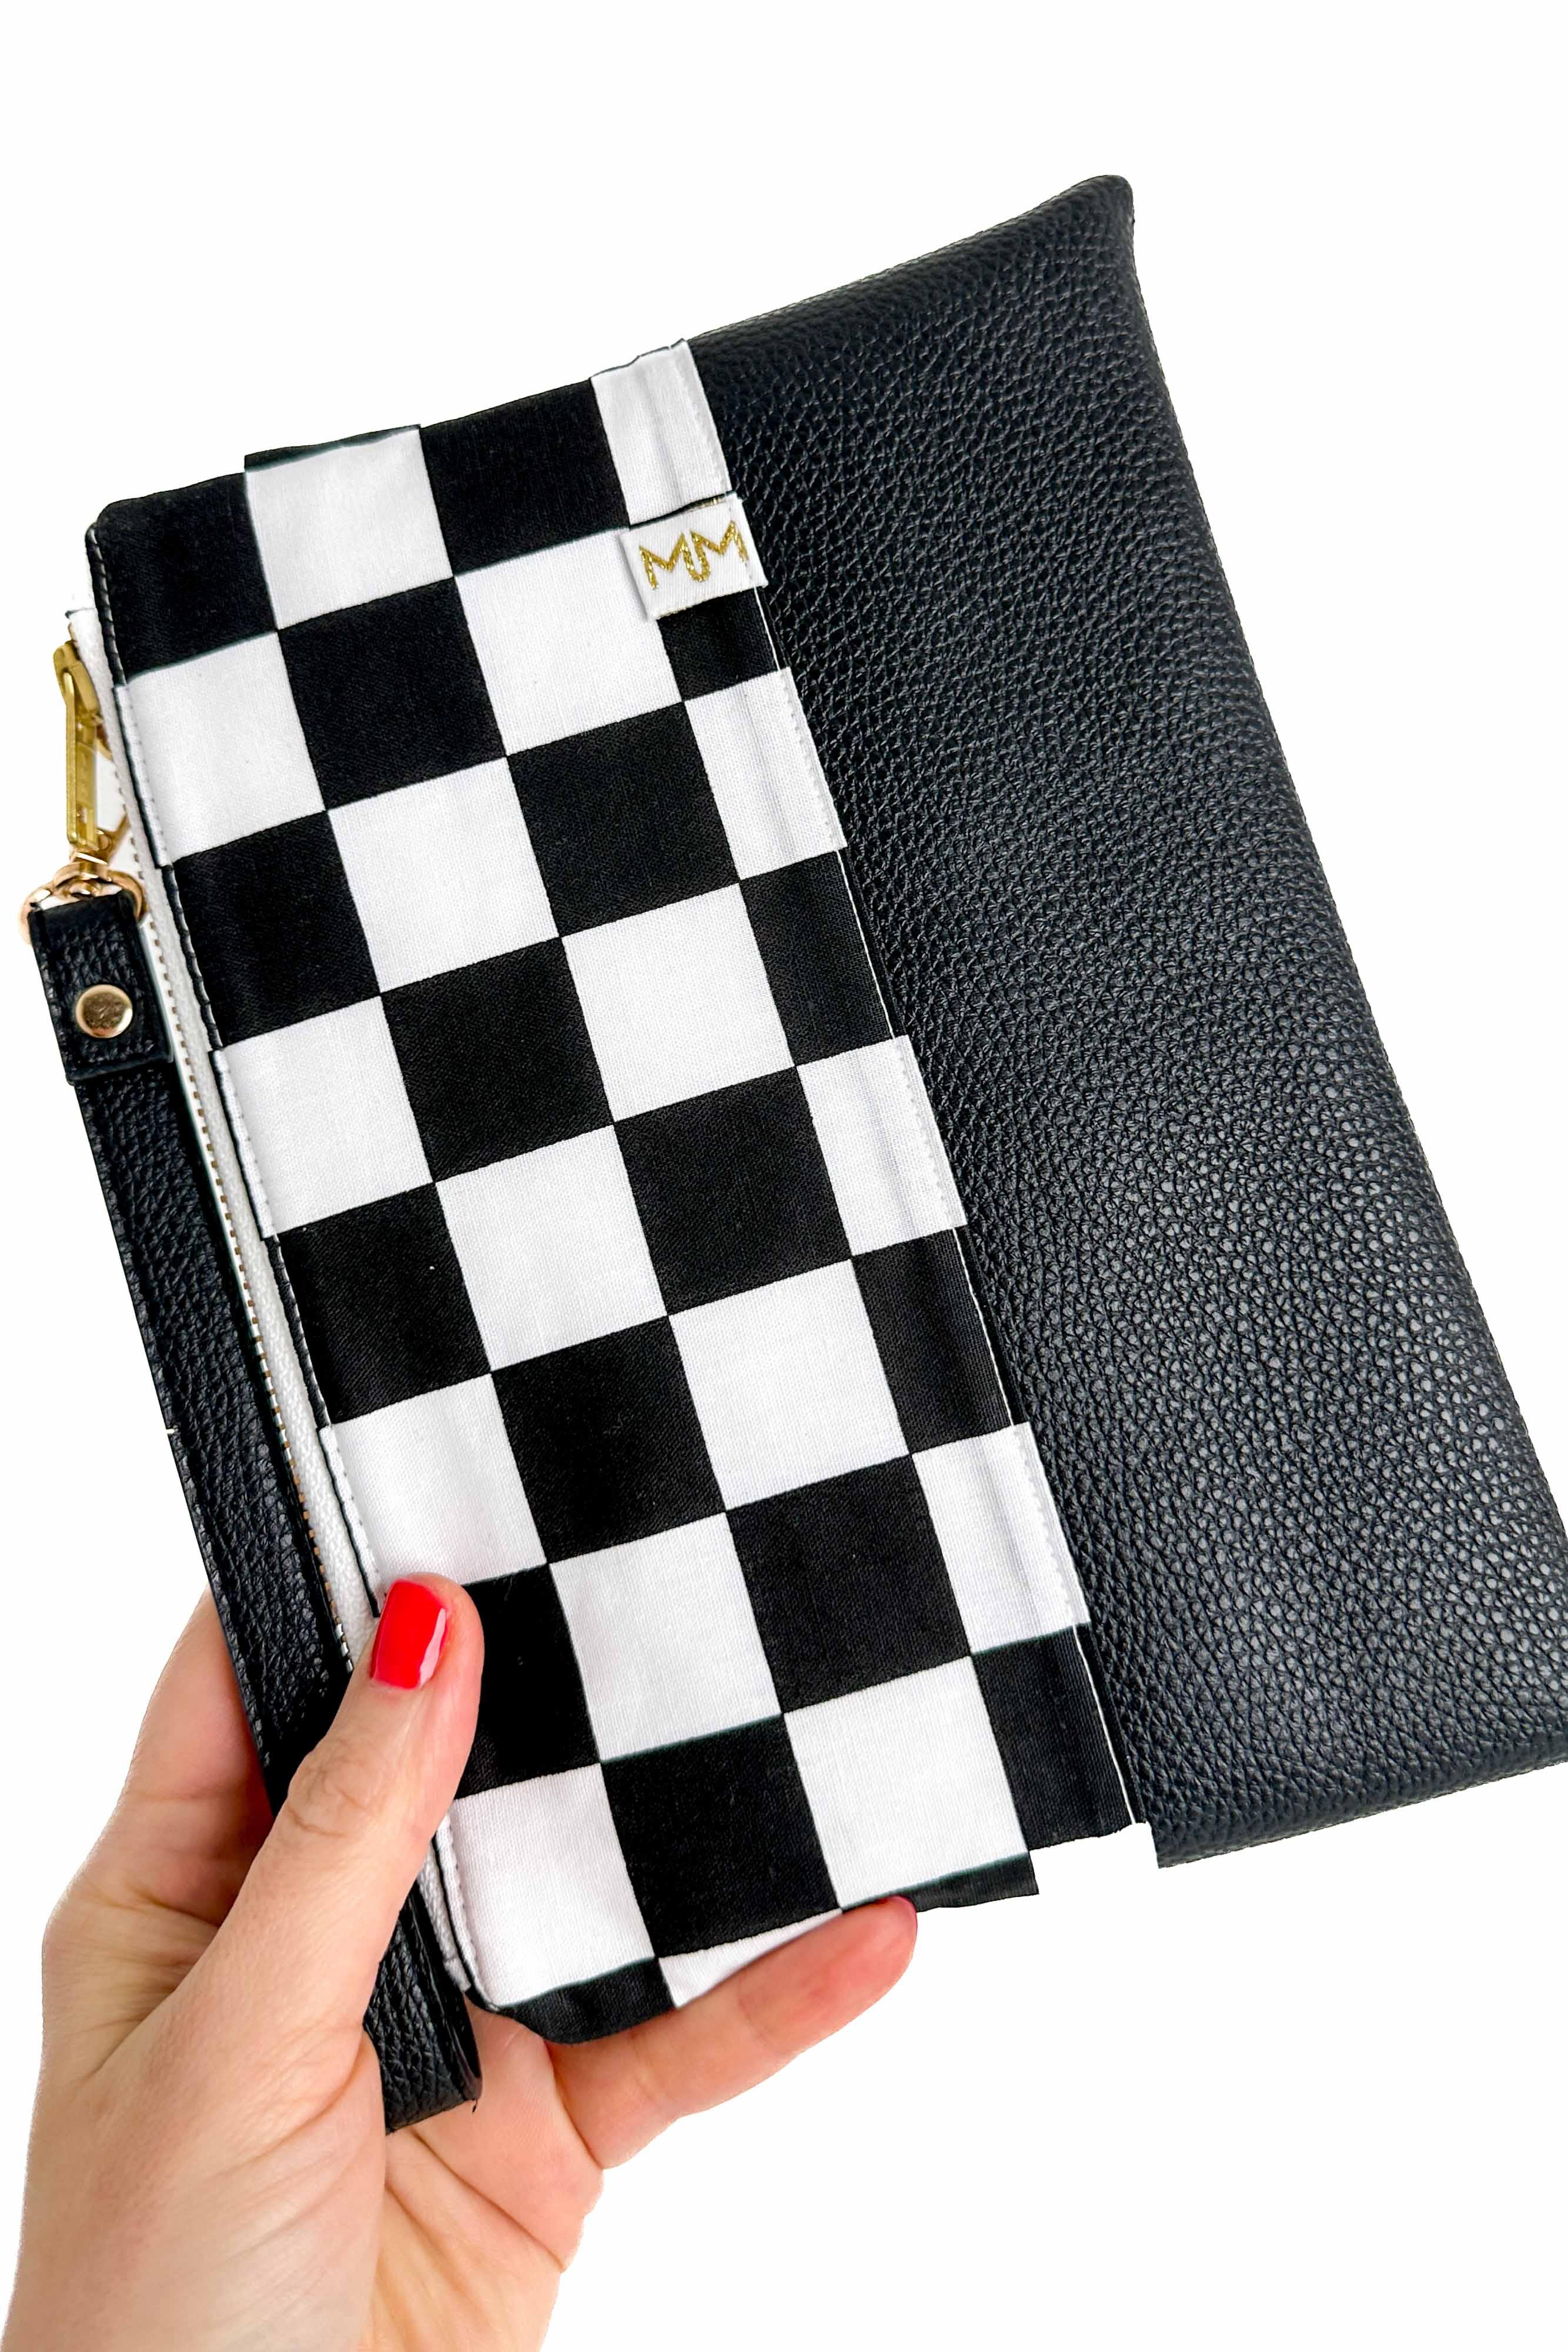 Checker Convertible Crossbody Wristlet+ with Compartments READY TO SHIP - Modern Makerie